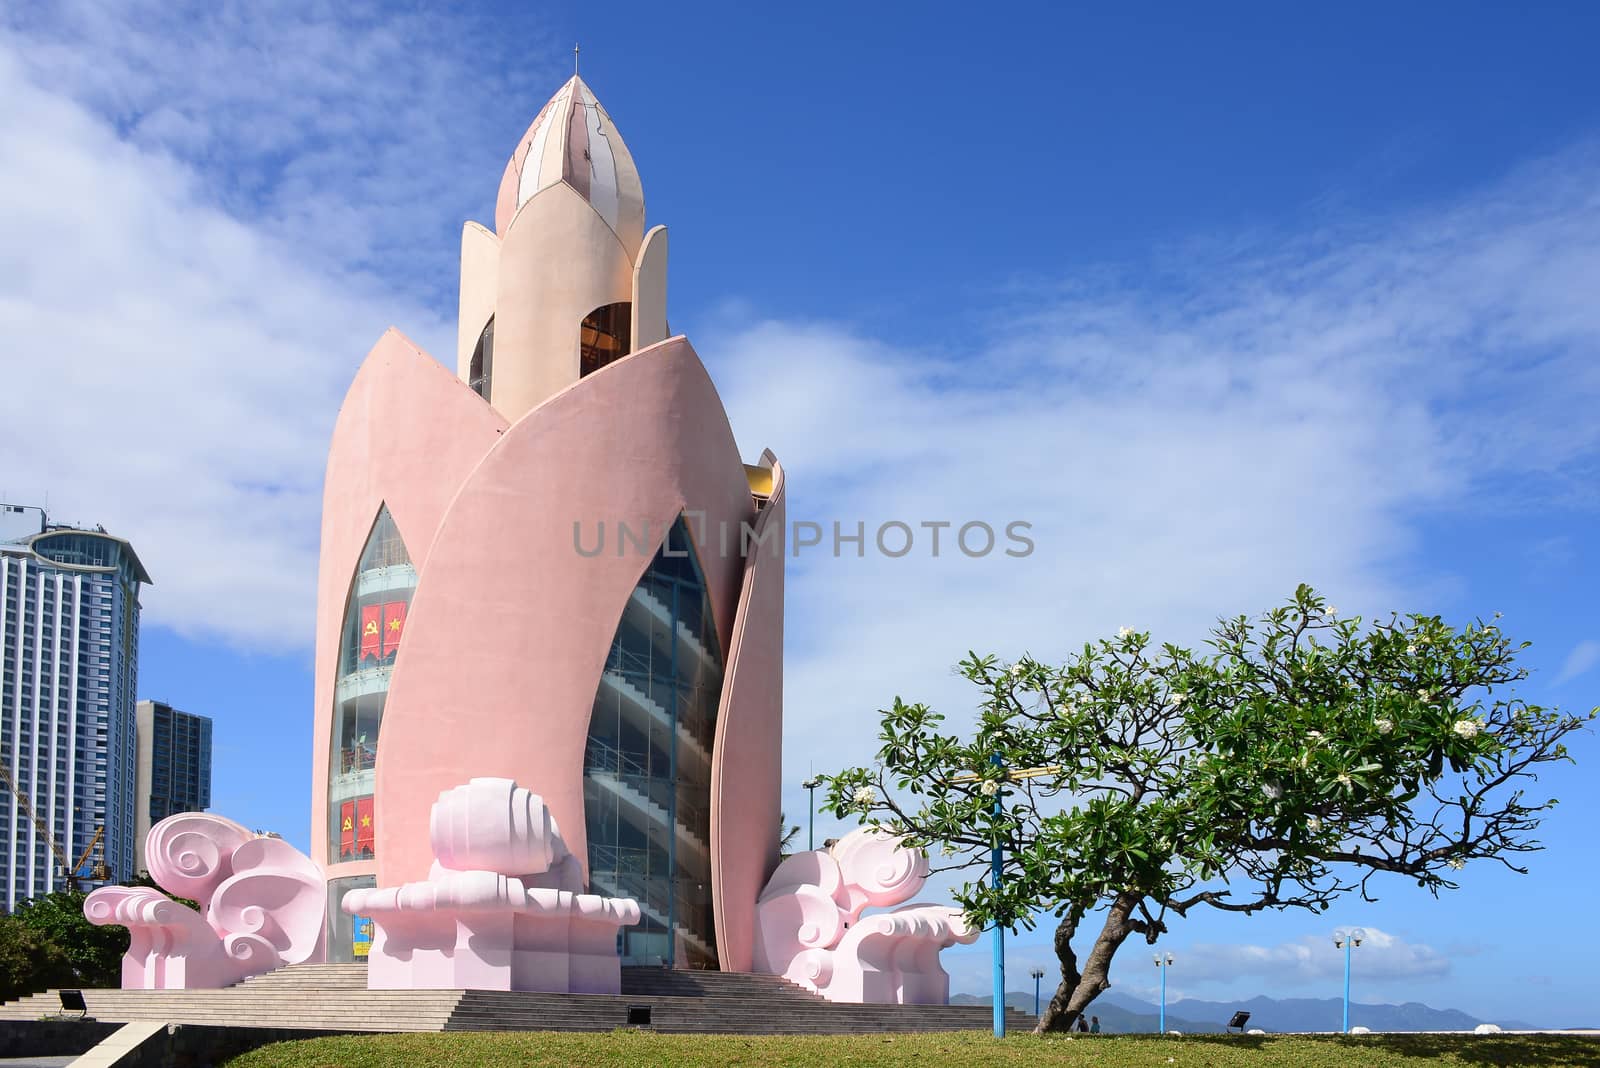 Tram Huong Tower, which is located in the center of the city, is considered as the symbol of Nha Trang city by ideation90